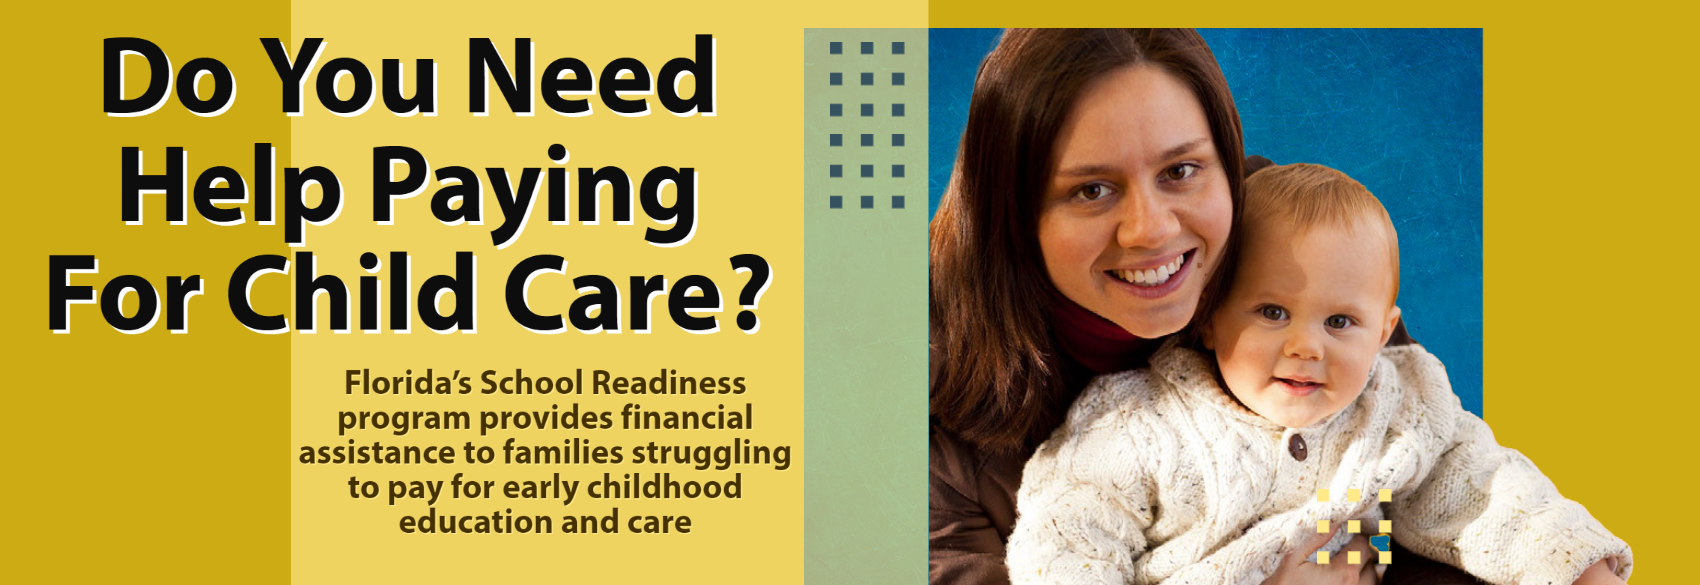 Do you need help paying for child care?